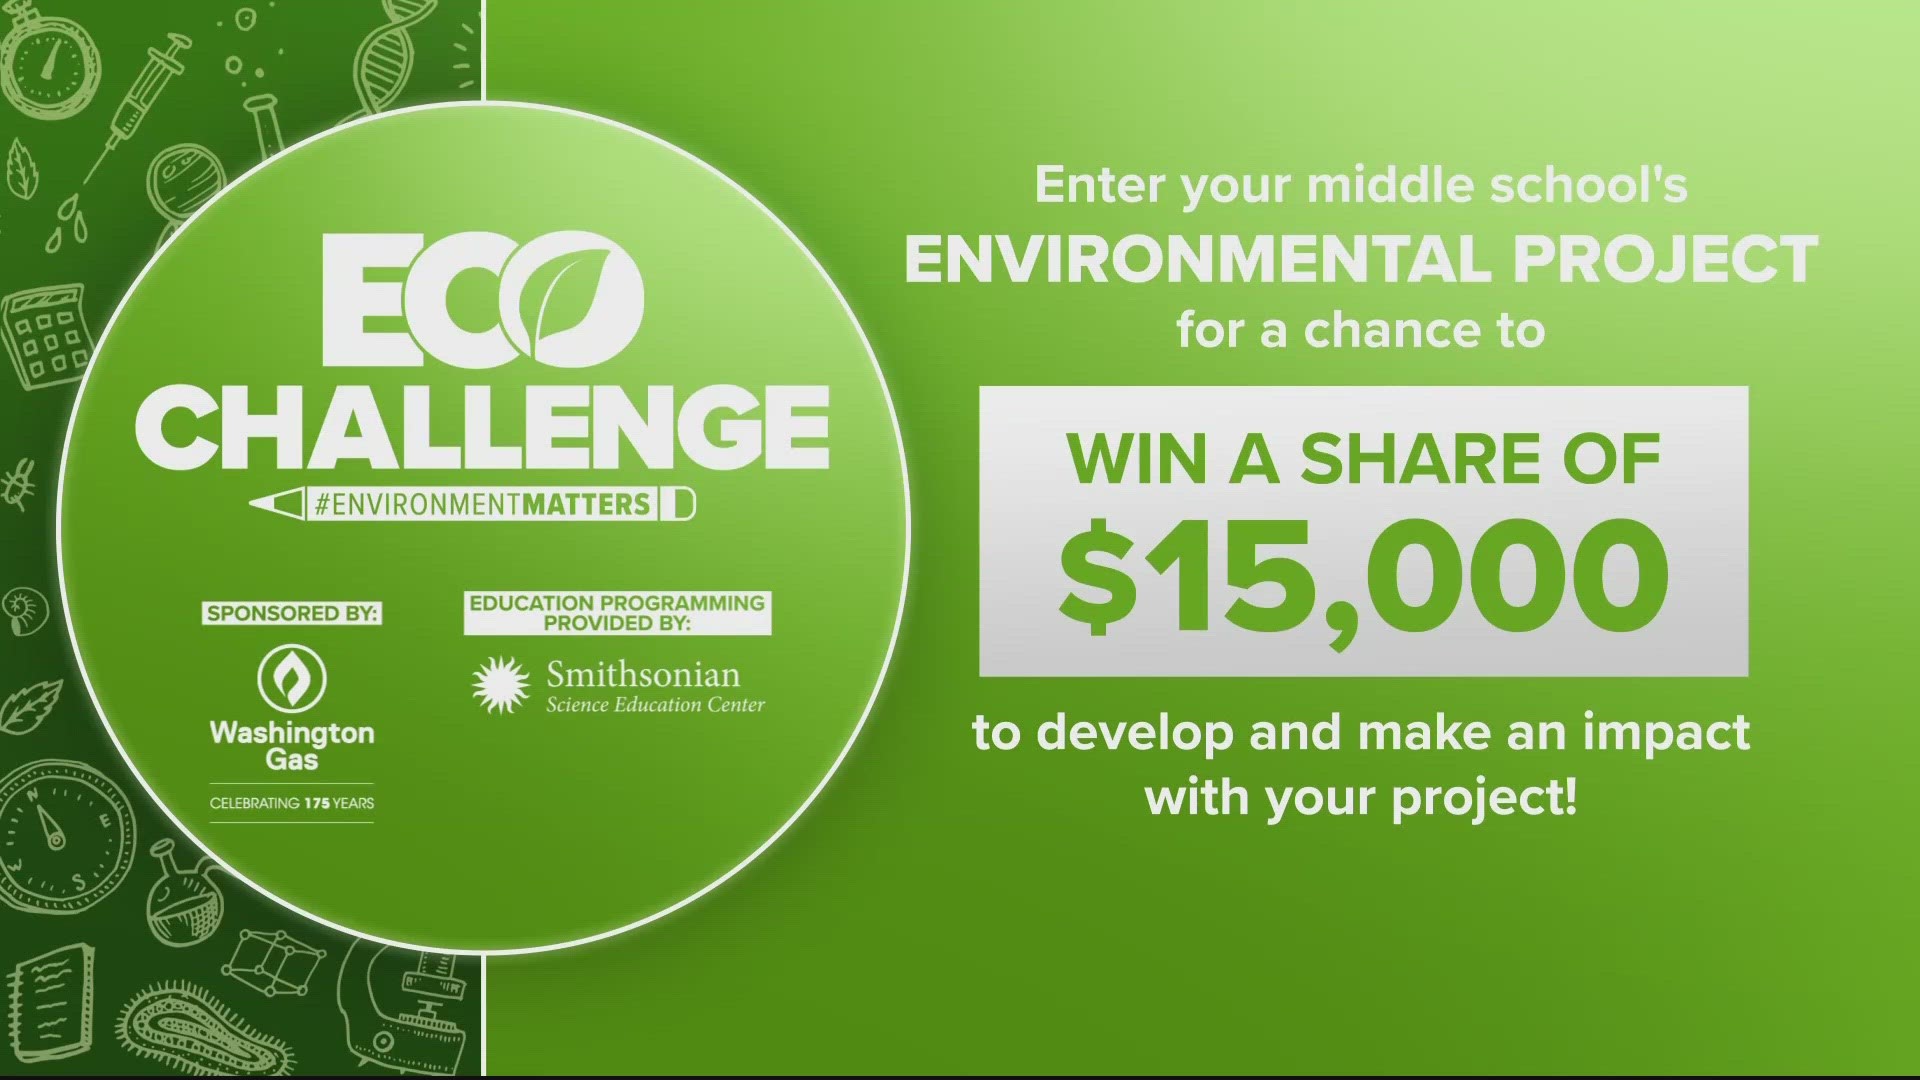 In addition to recieving the free environmental learning materials from the Smithsonian Science Education Center You could also win up to 5-thousand dollars!